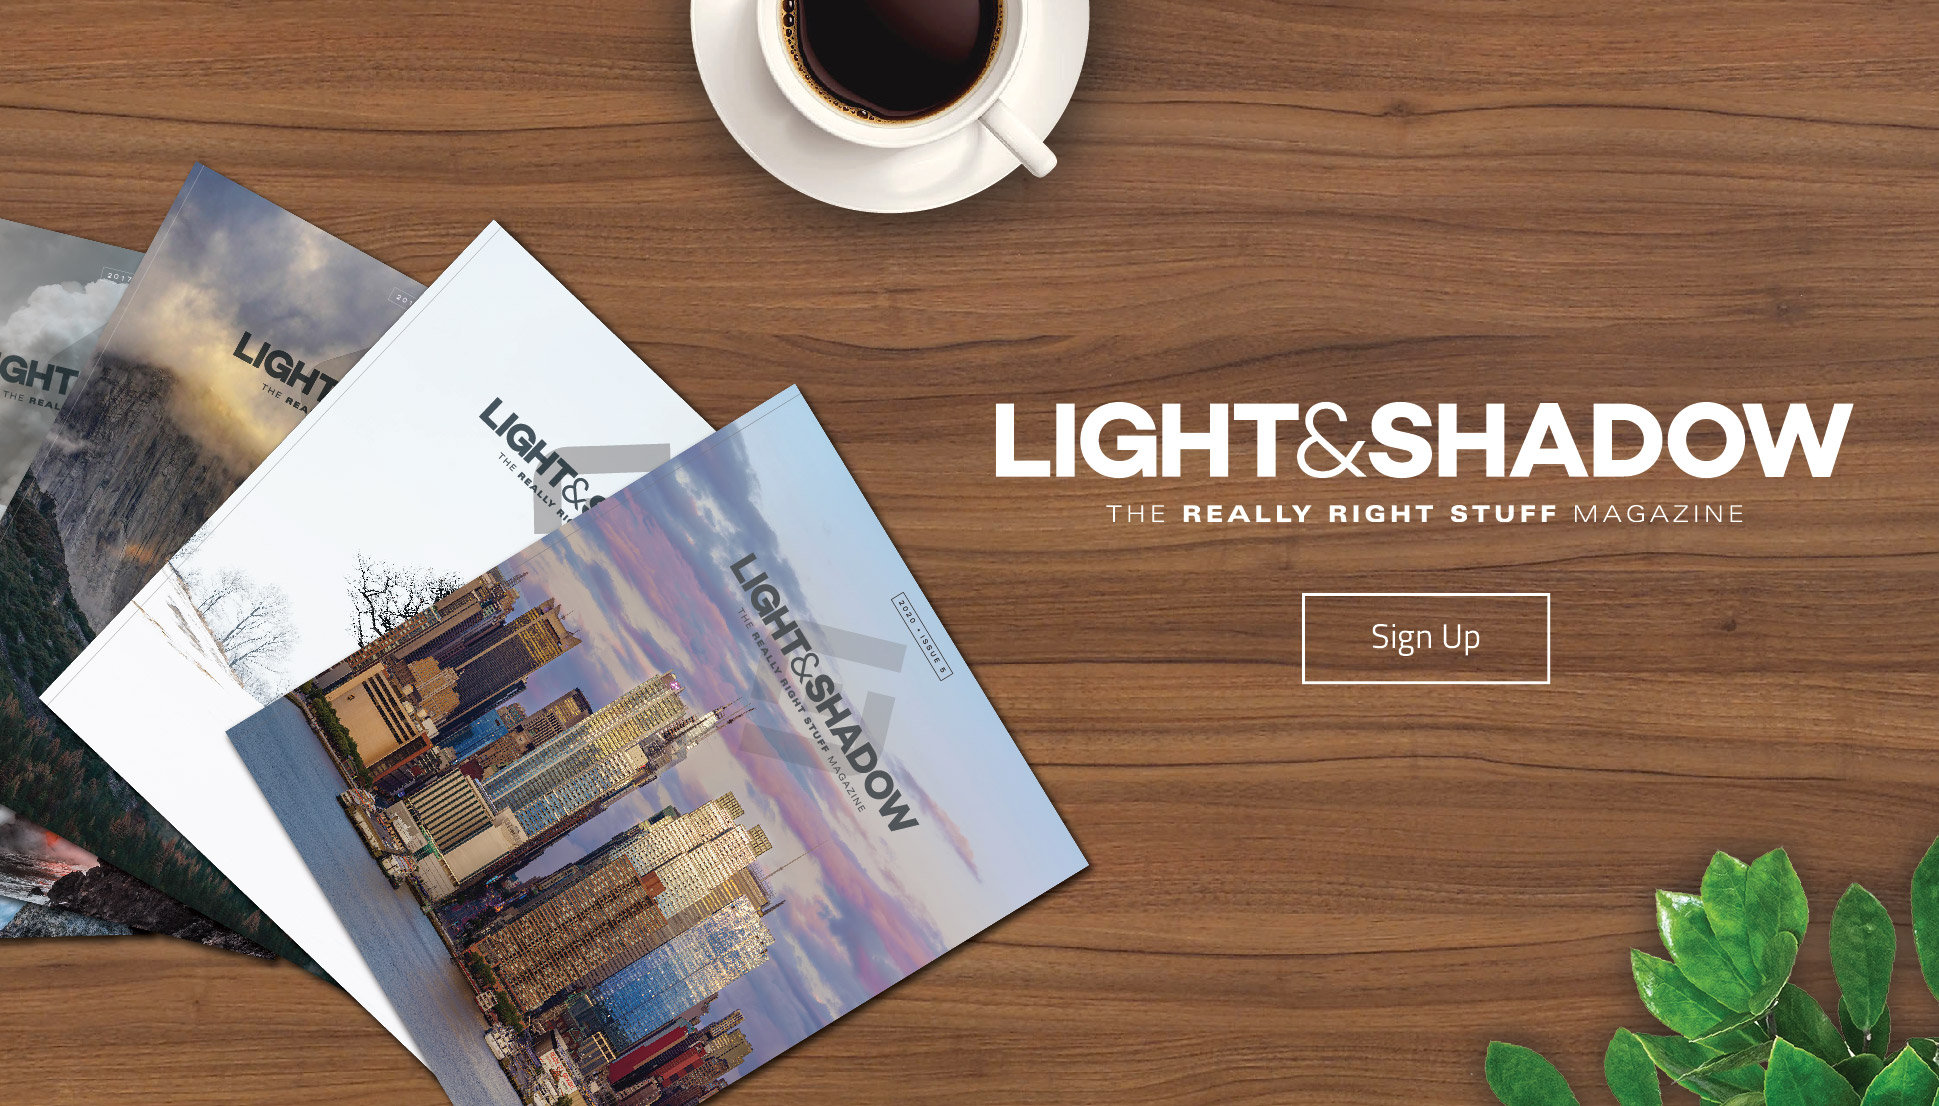 Light & Shadow: The Really Right Stuff Magazine. Sign Up.